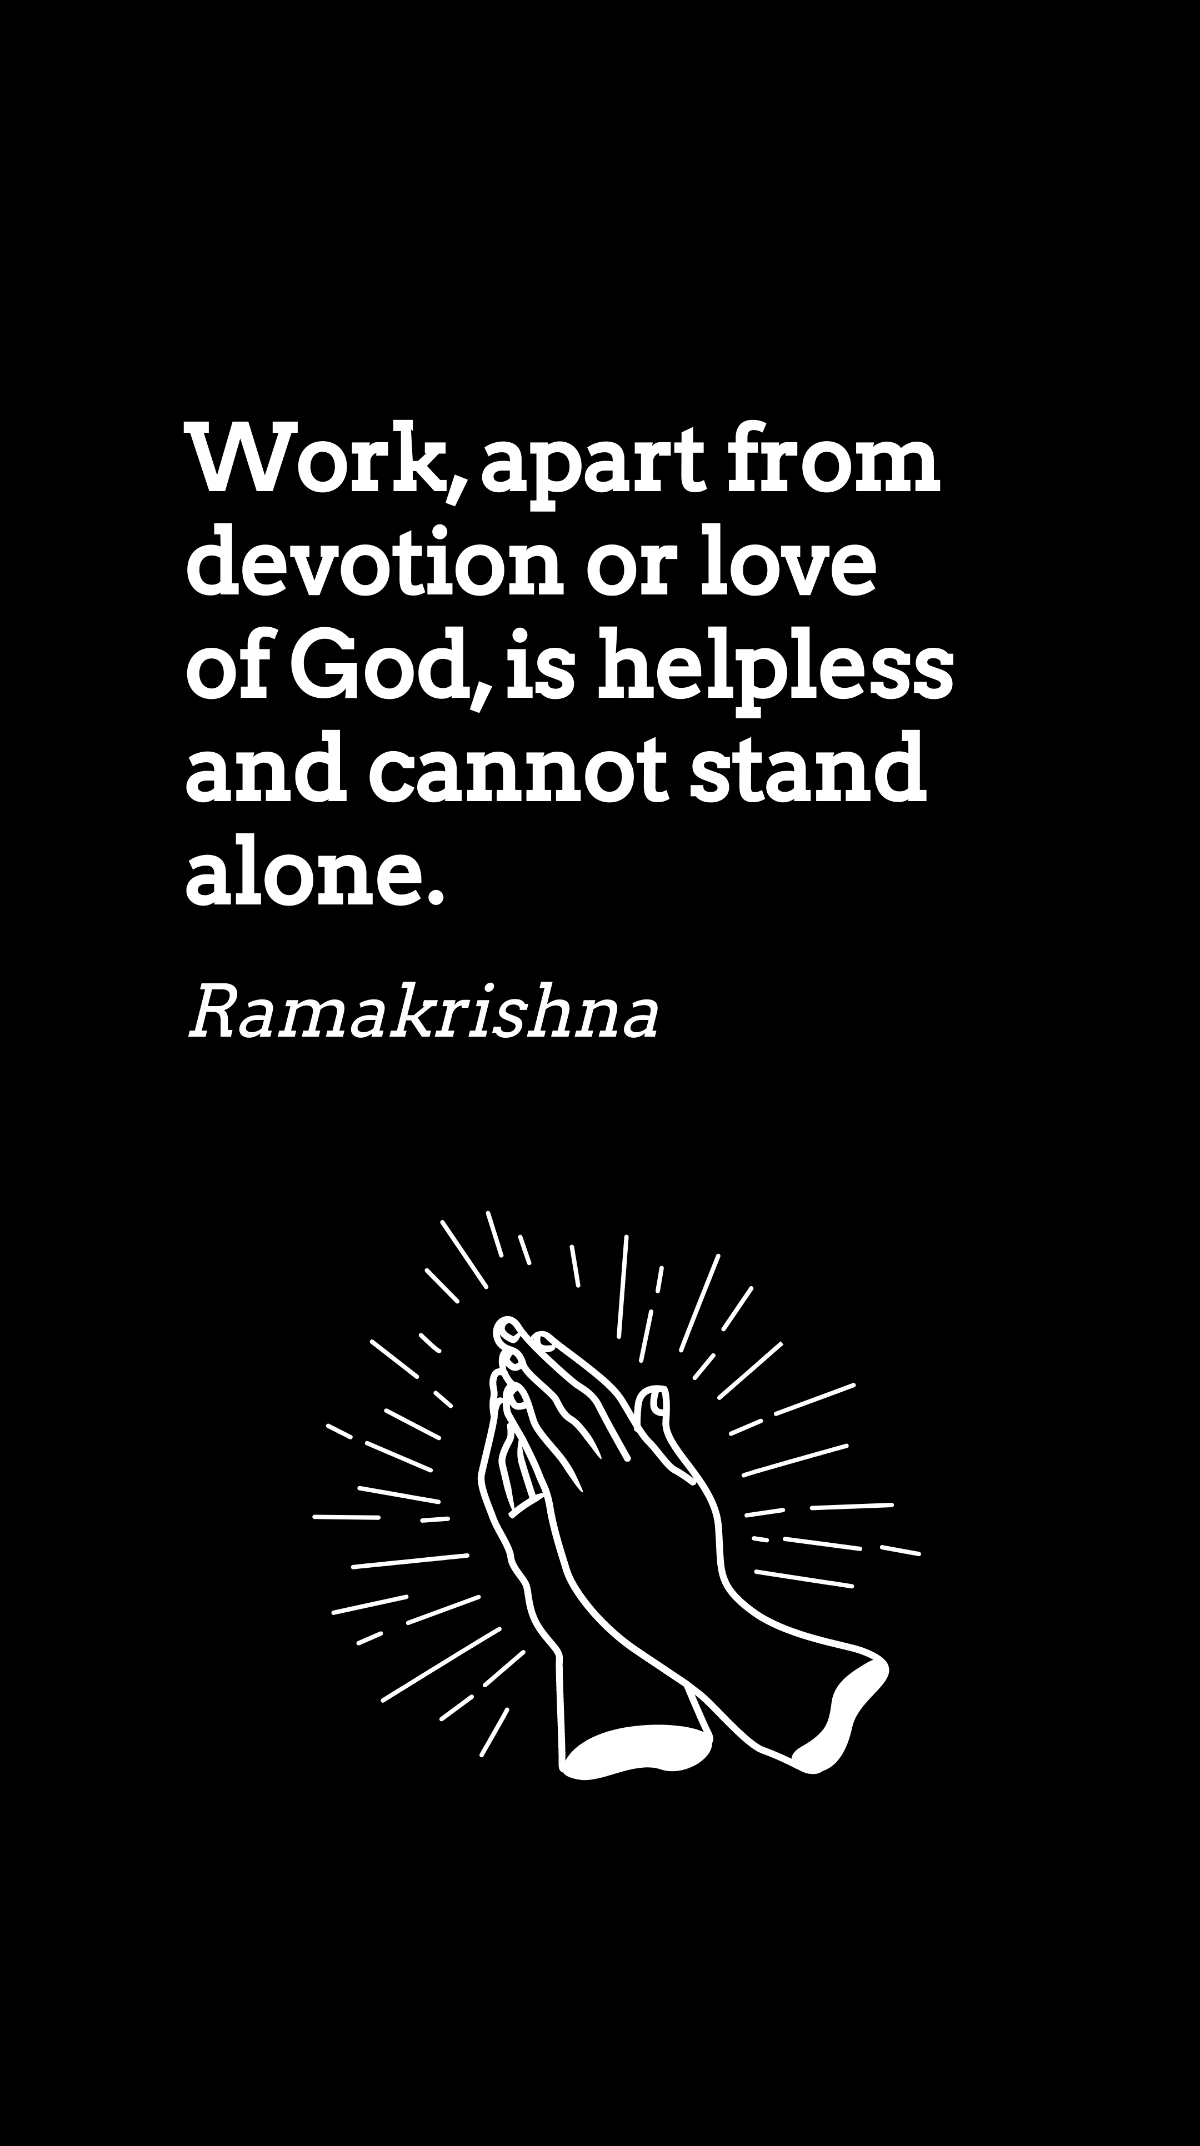 Free Ramakrishna - Work, apart from devotion or love of God, is helpless and cannot stand alone. Template